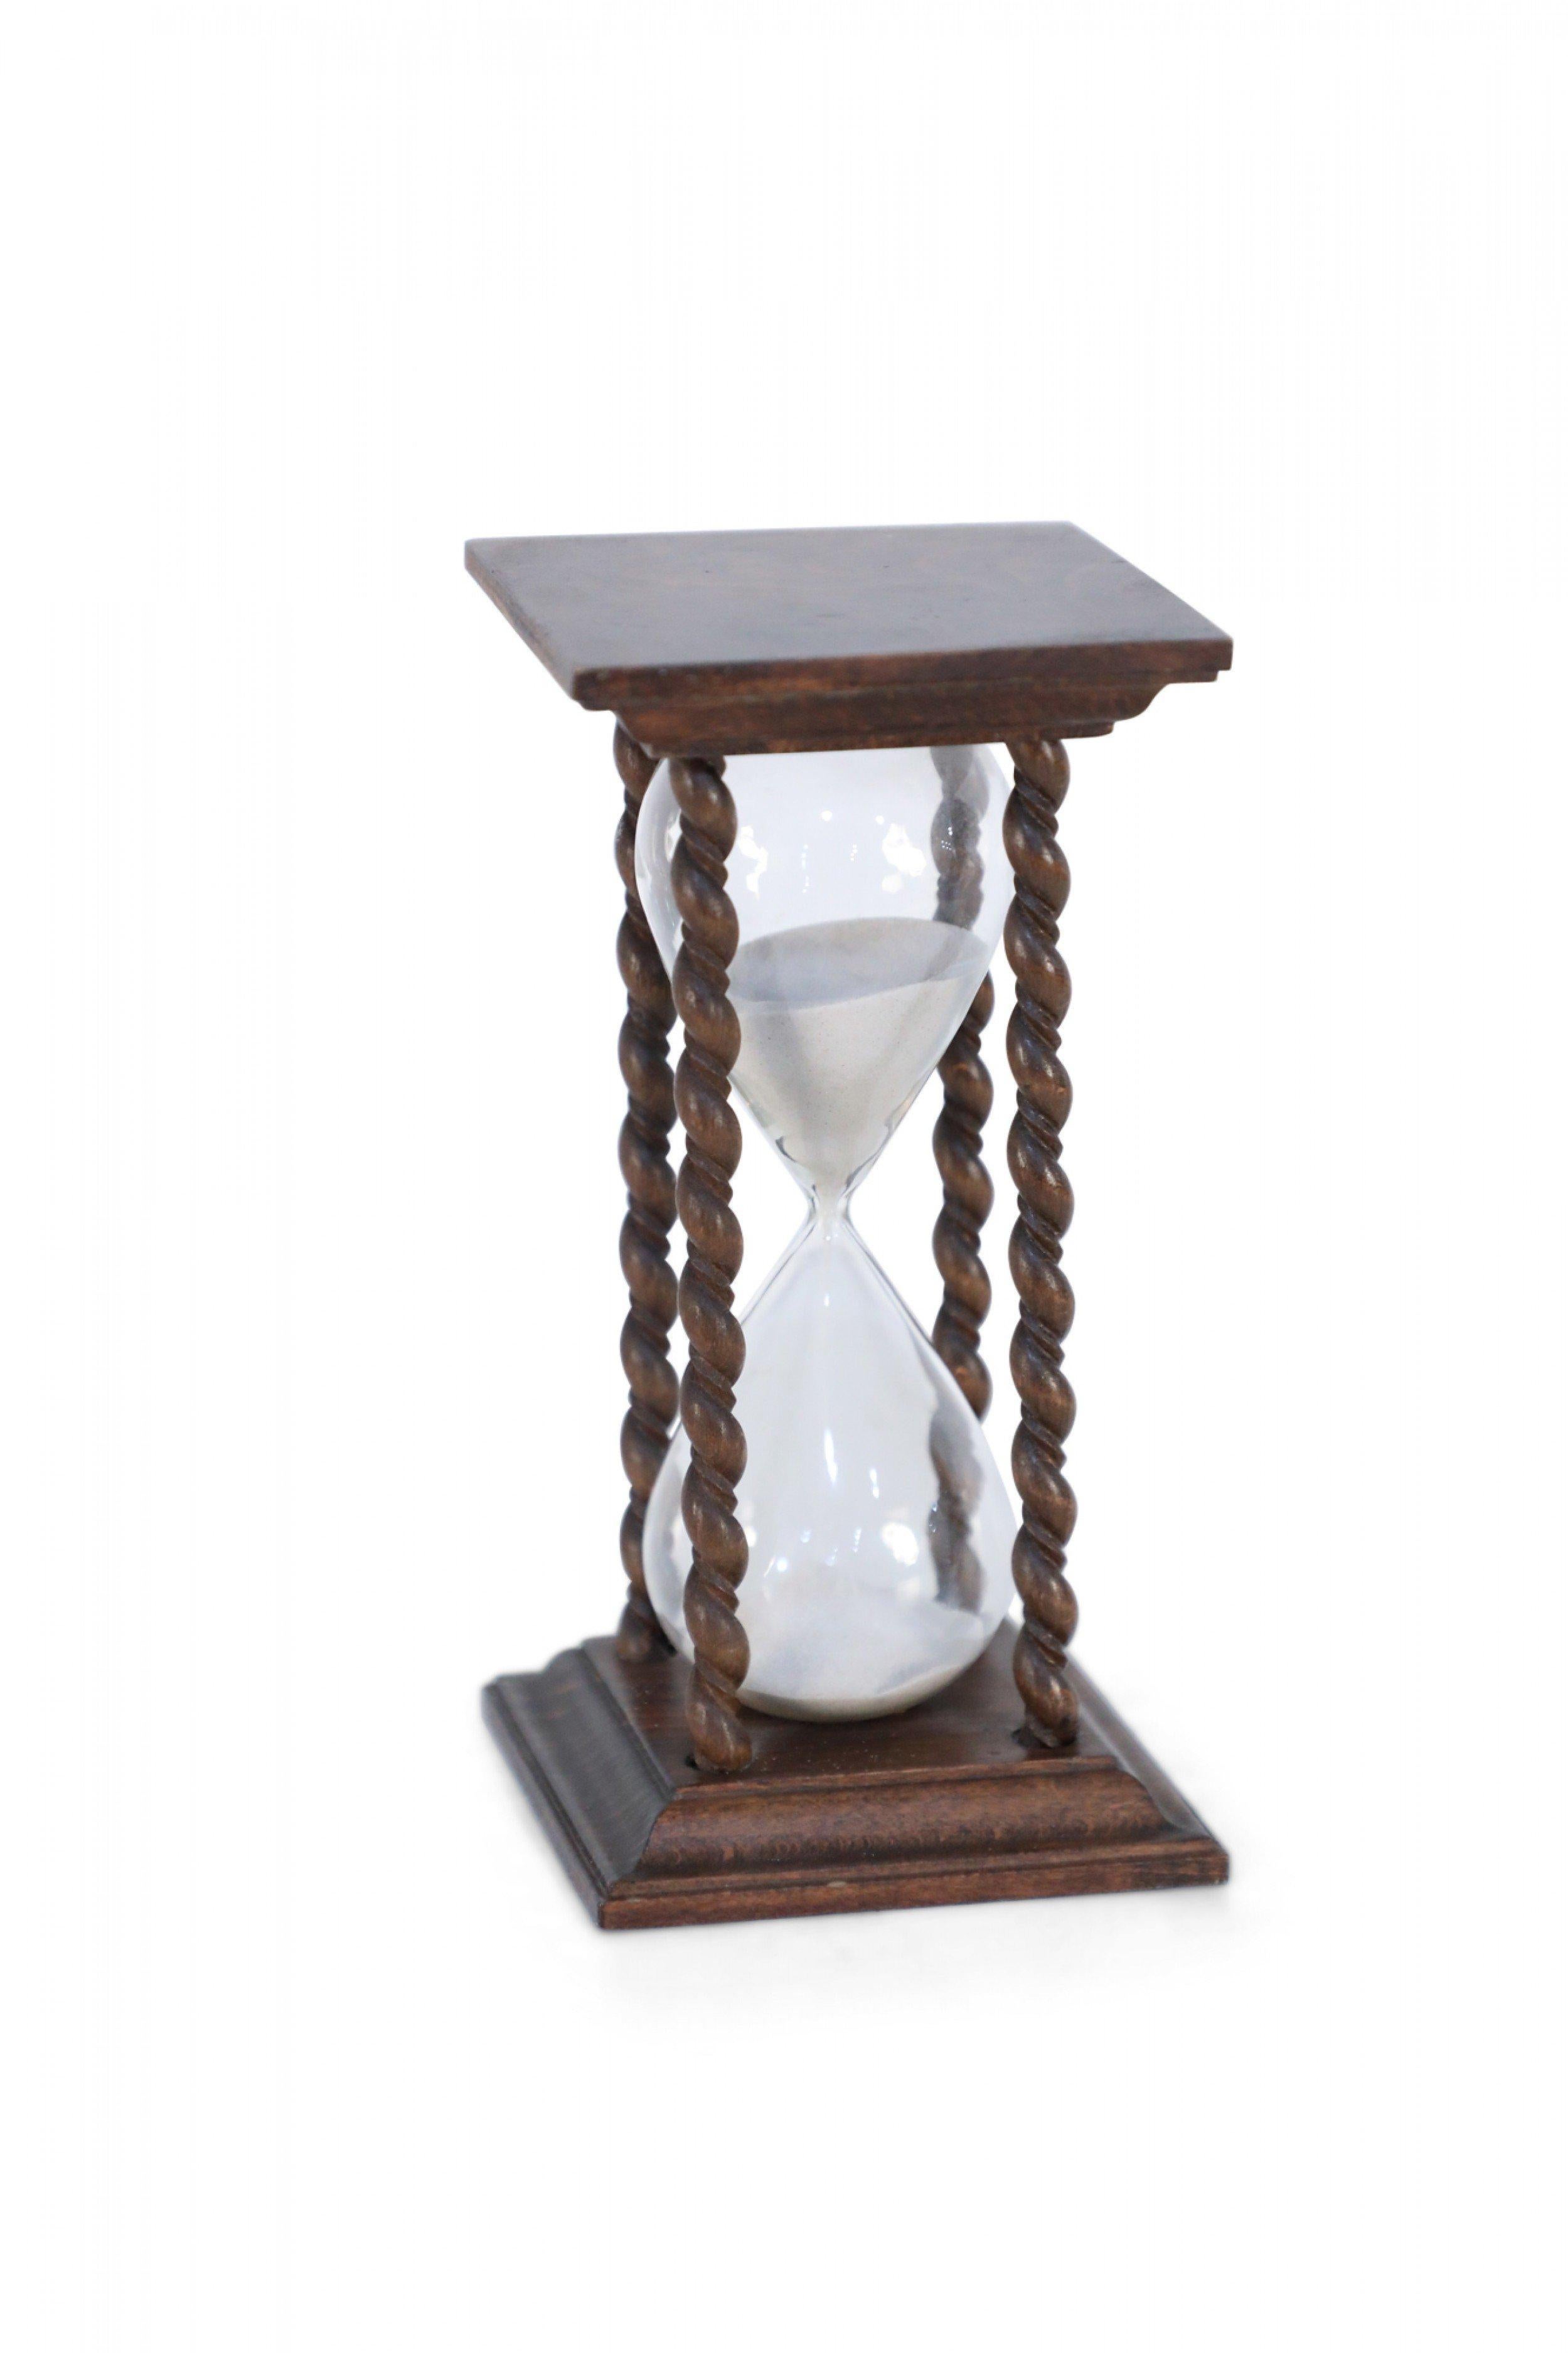 19th Century American Victorian Wooden Turned Column Hourglass